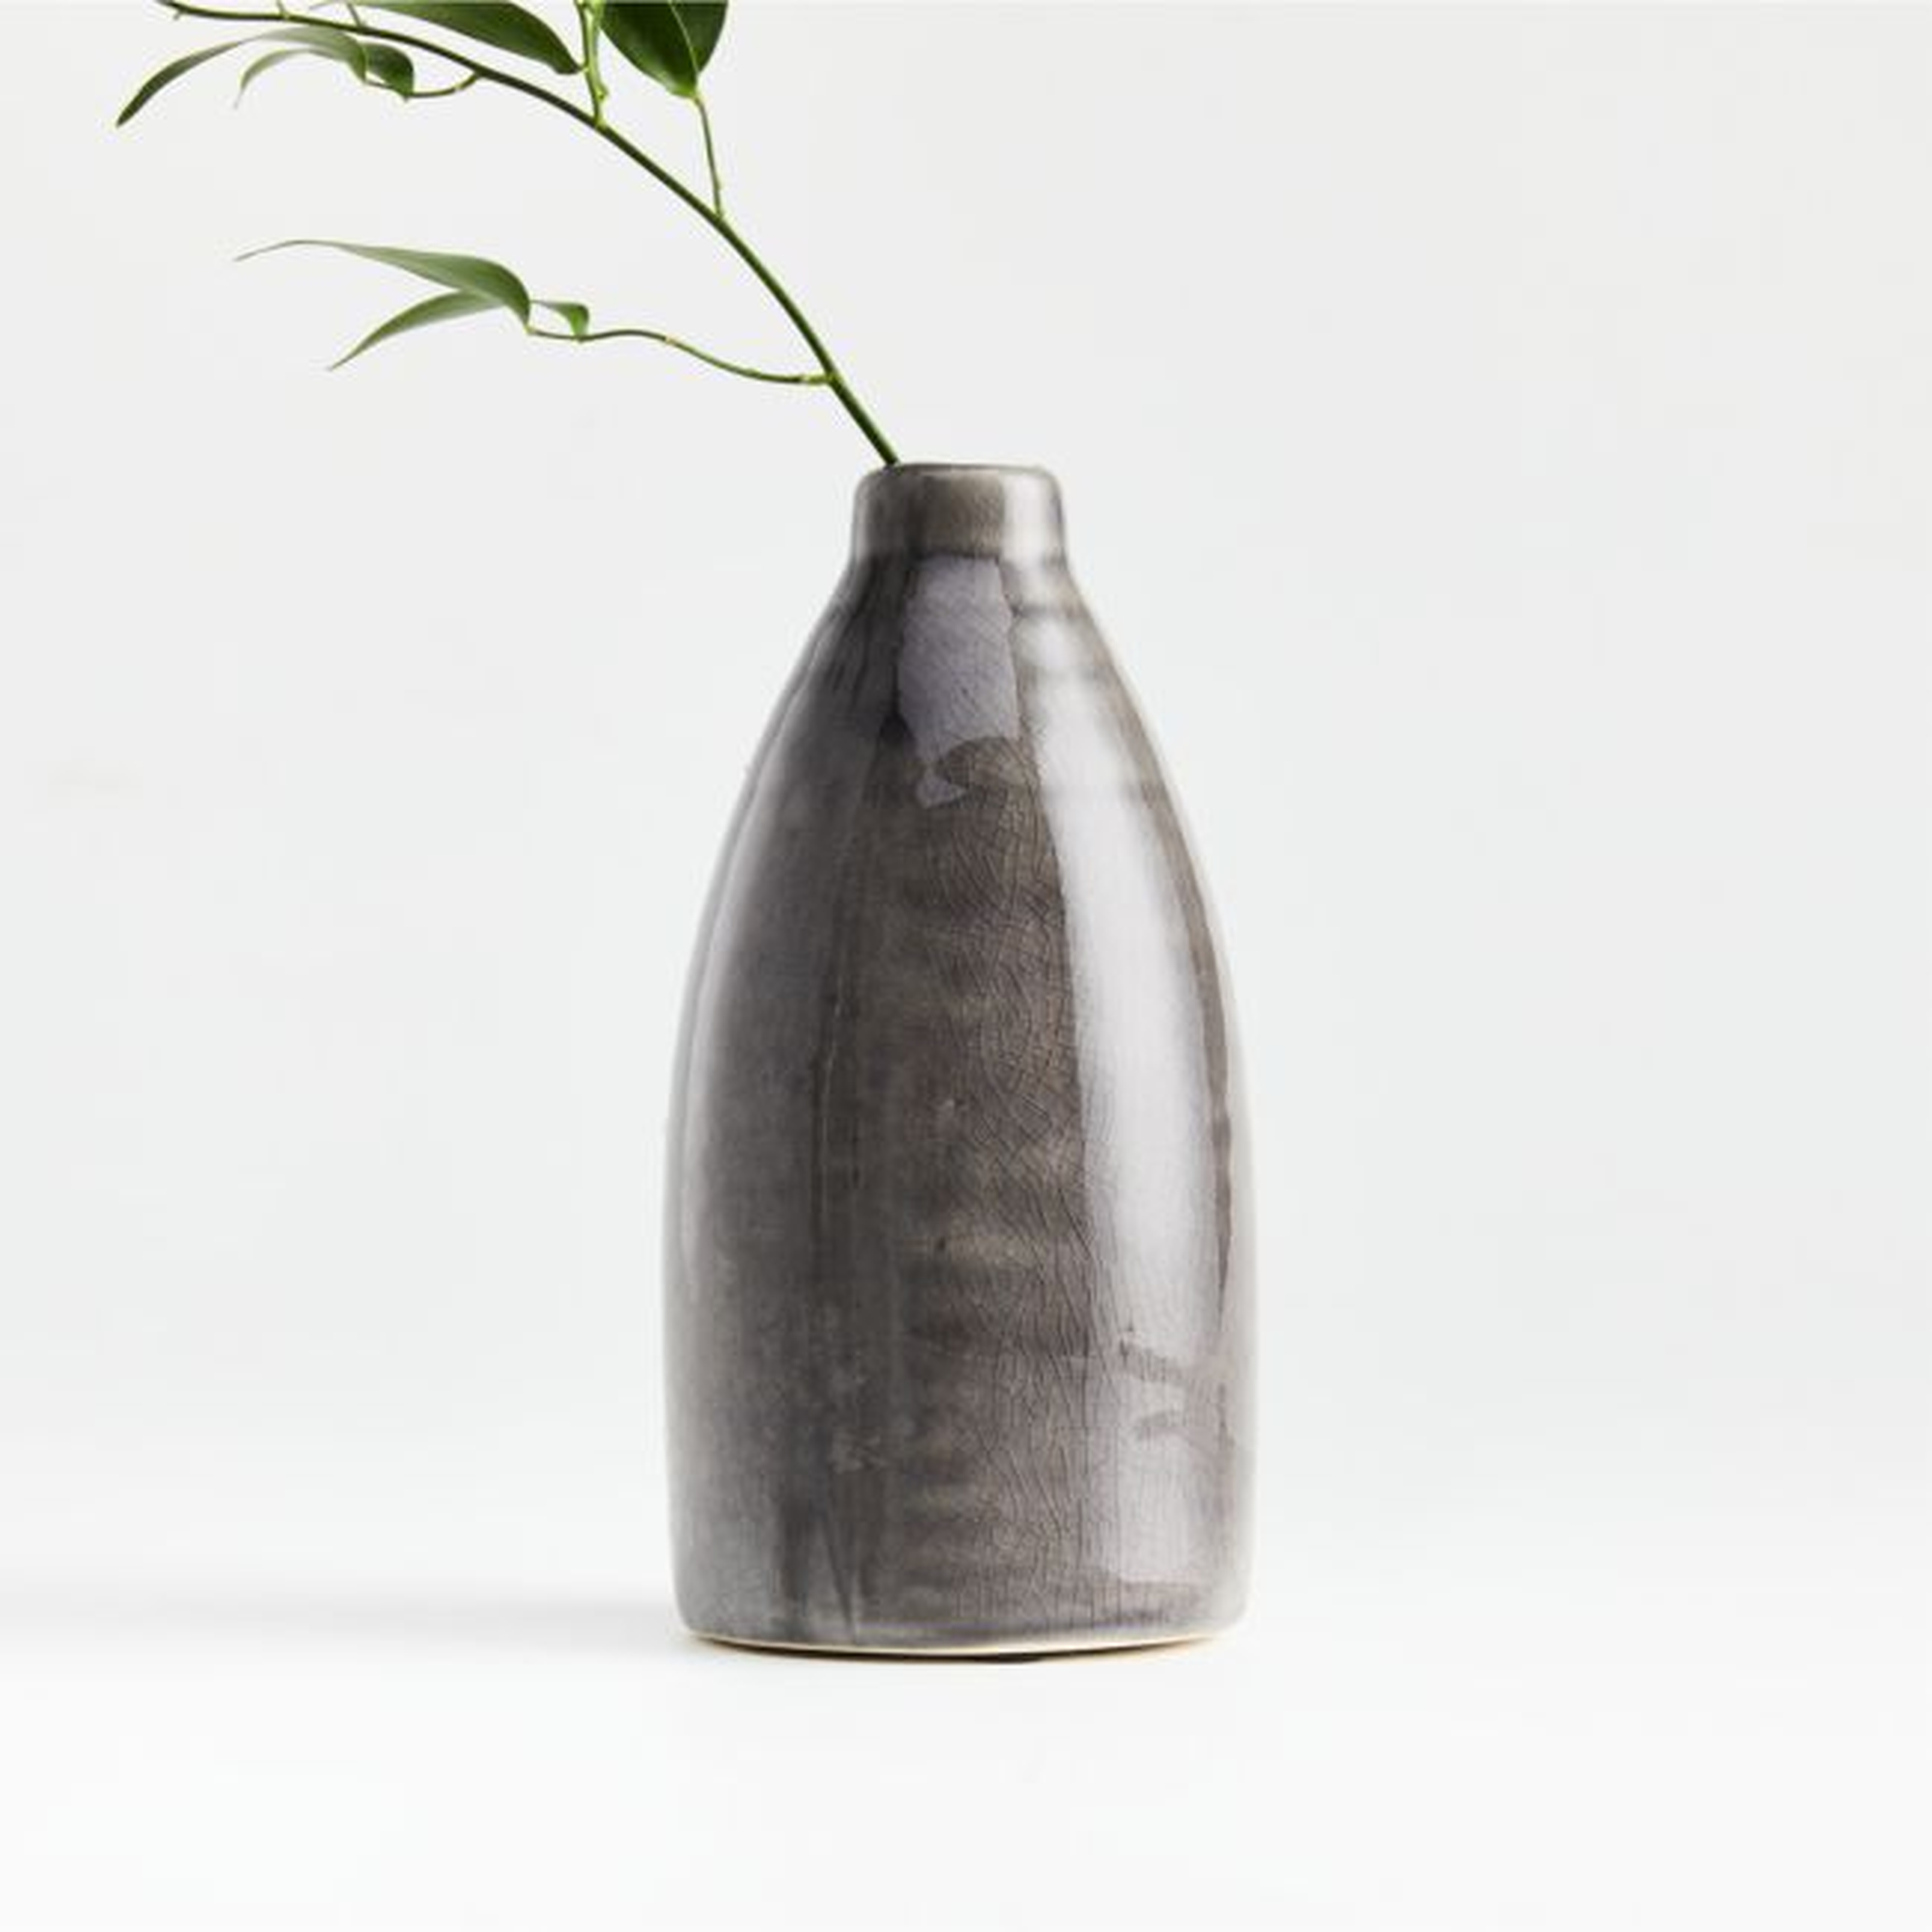 Patine Grey Bud Vase - Crate and Barrel